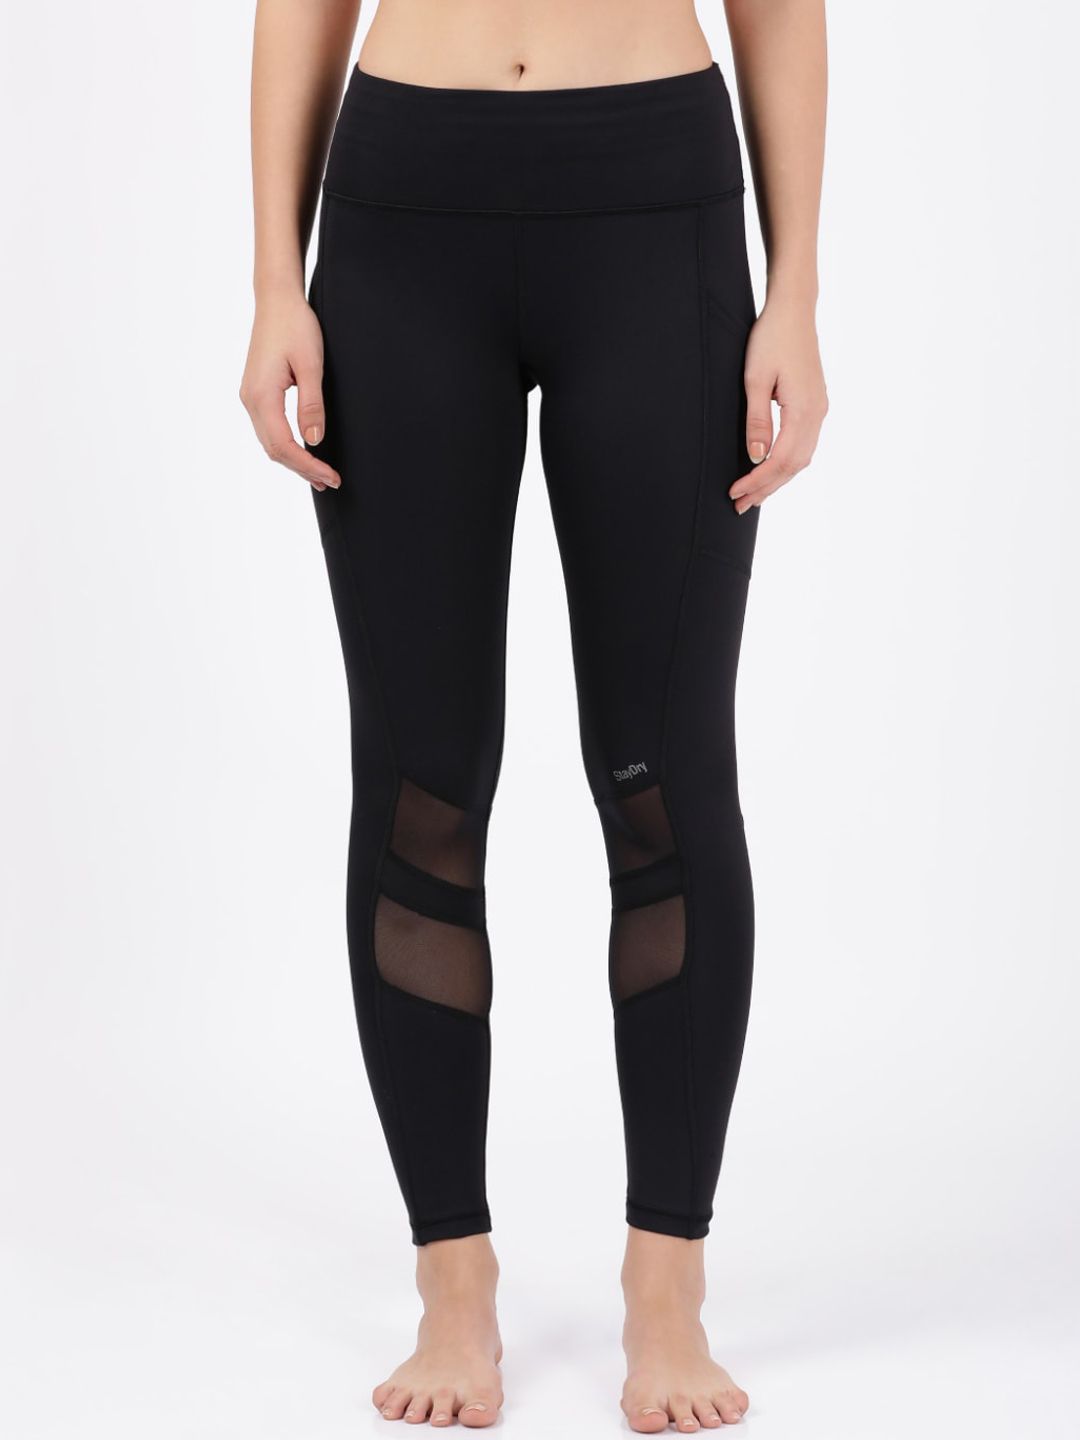 Jockey Women Black Solid Antimicrobial Slim Fit Yoga Tights Price in India